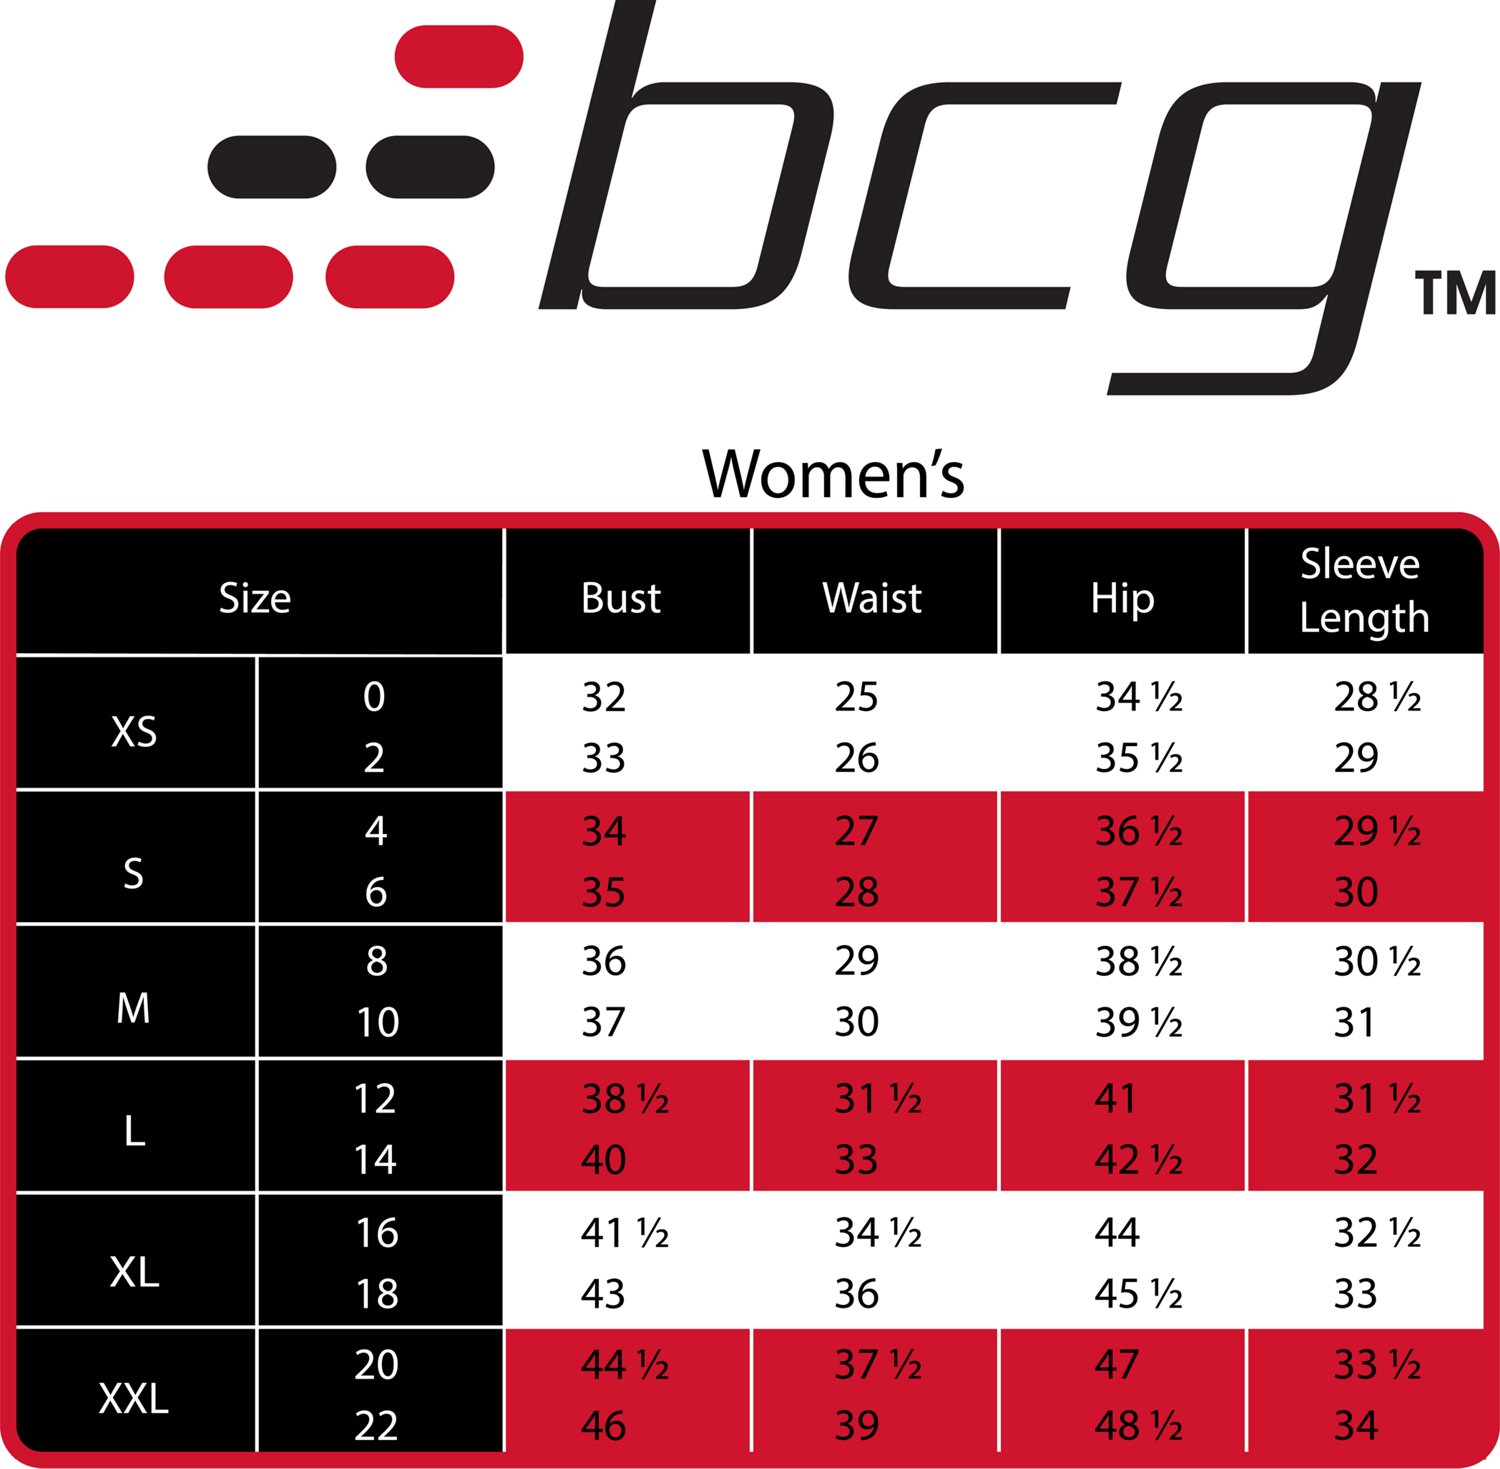 BCG Women's Low Support Molded Cup Sports Bra